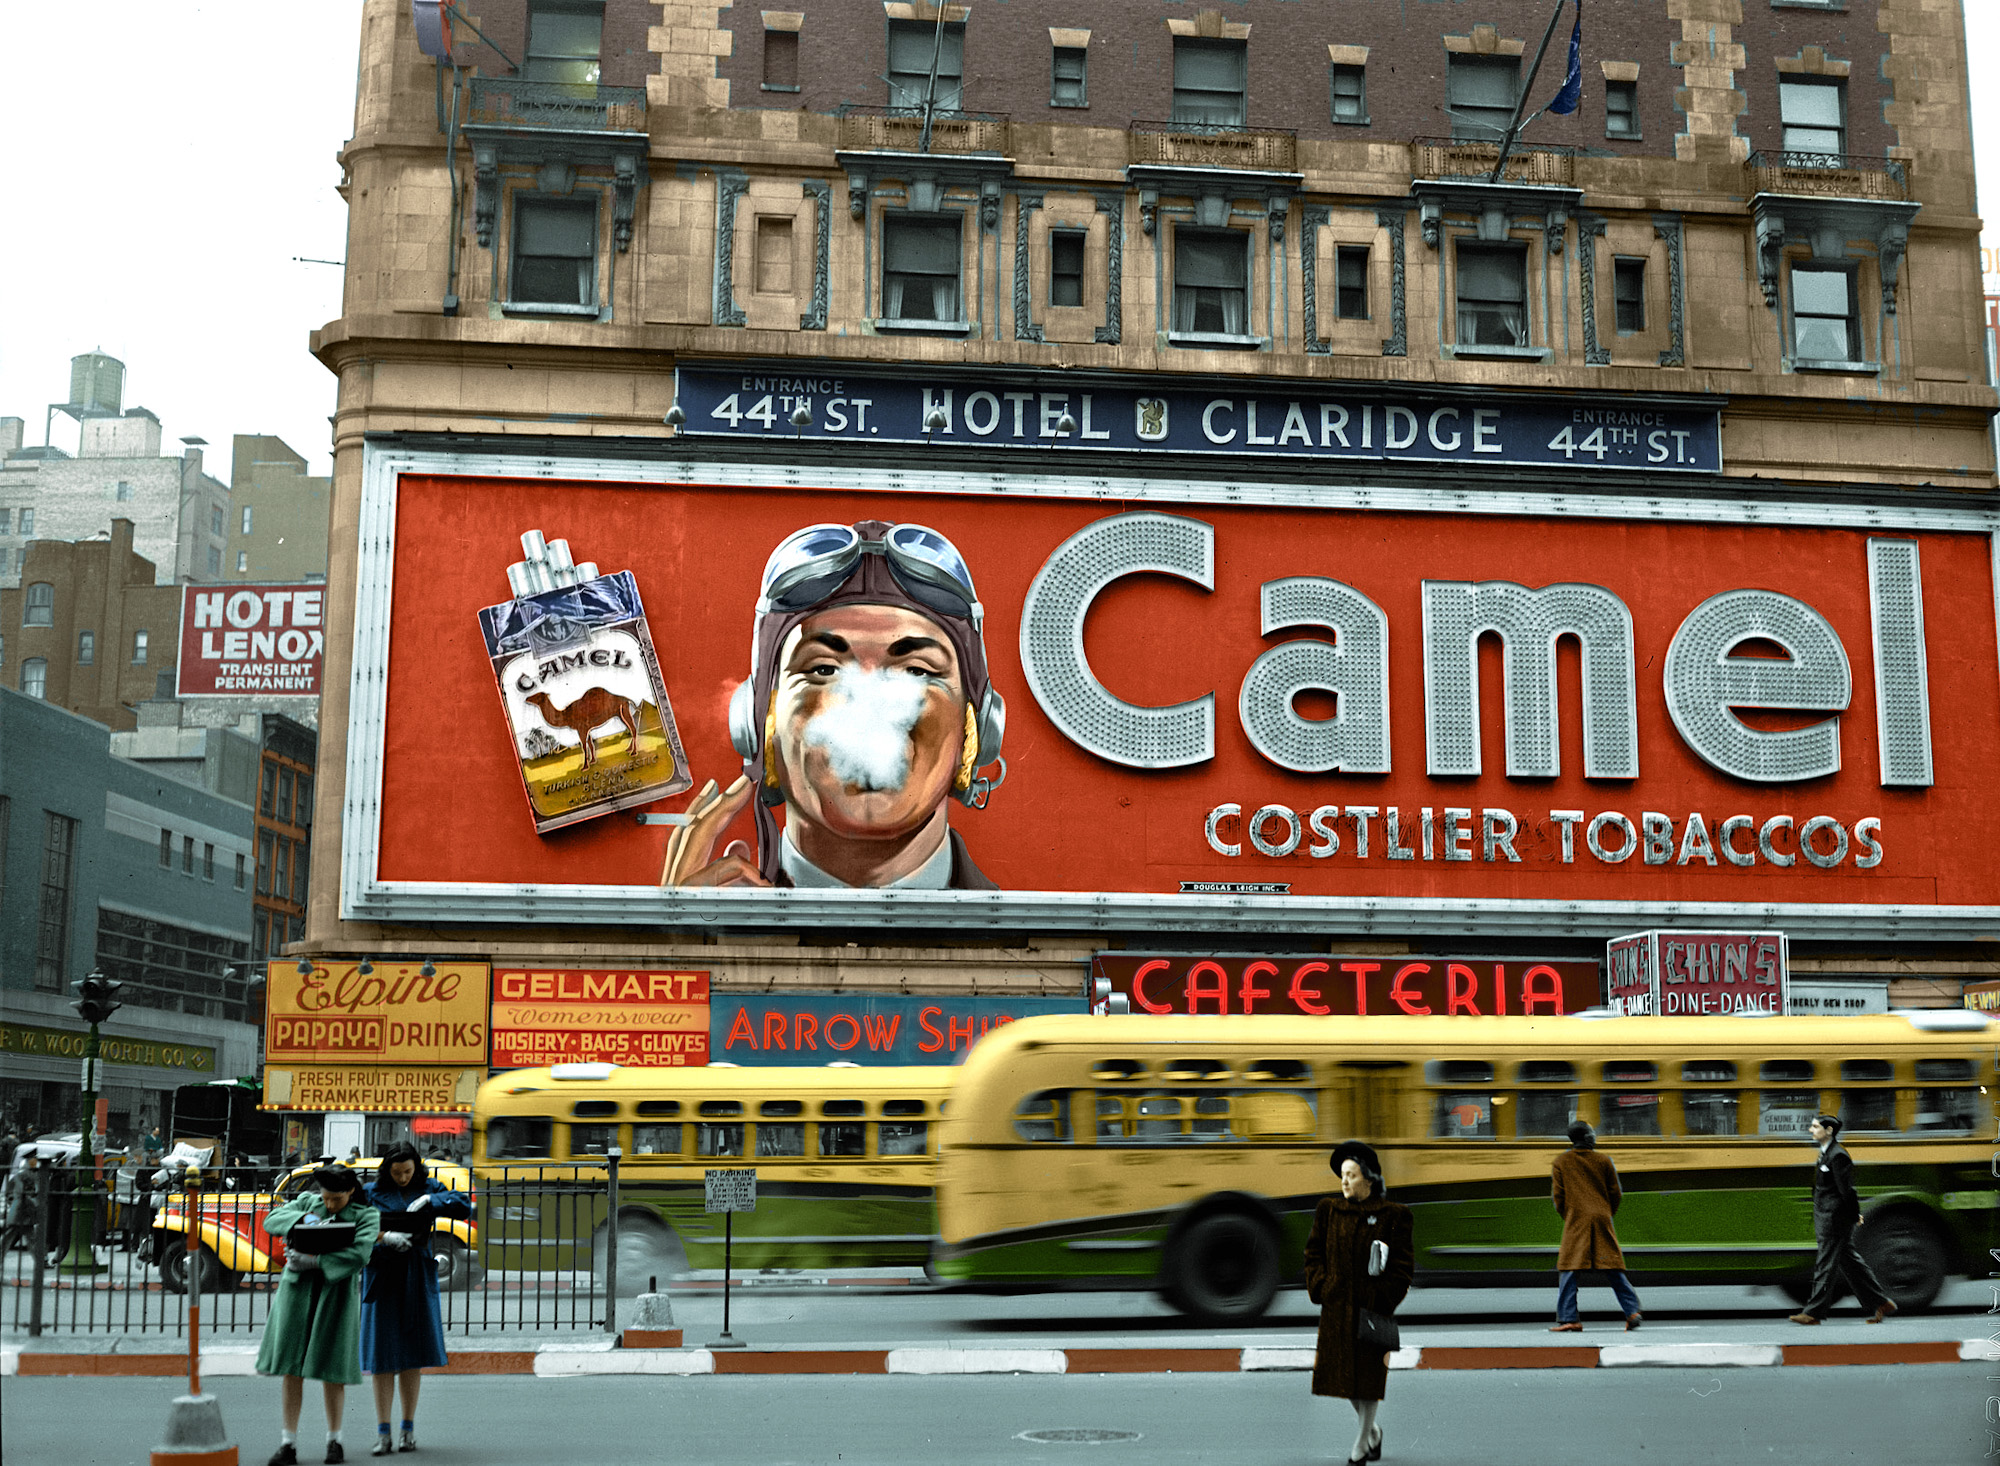 Another Times Square photo from 1943 by John Vachon, colorized. I hope you all enjoy this one as much as I did. Note the lights left on on the second floor. These are the small things that bring a photo to life. View full size.